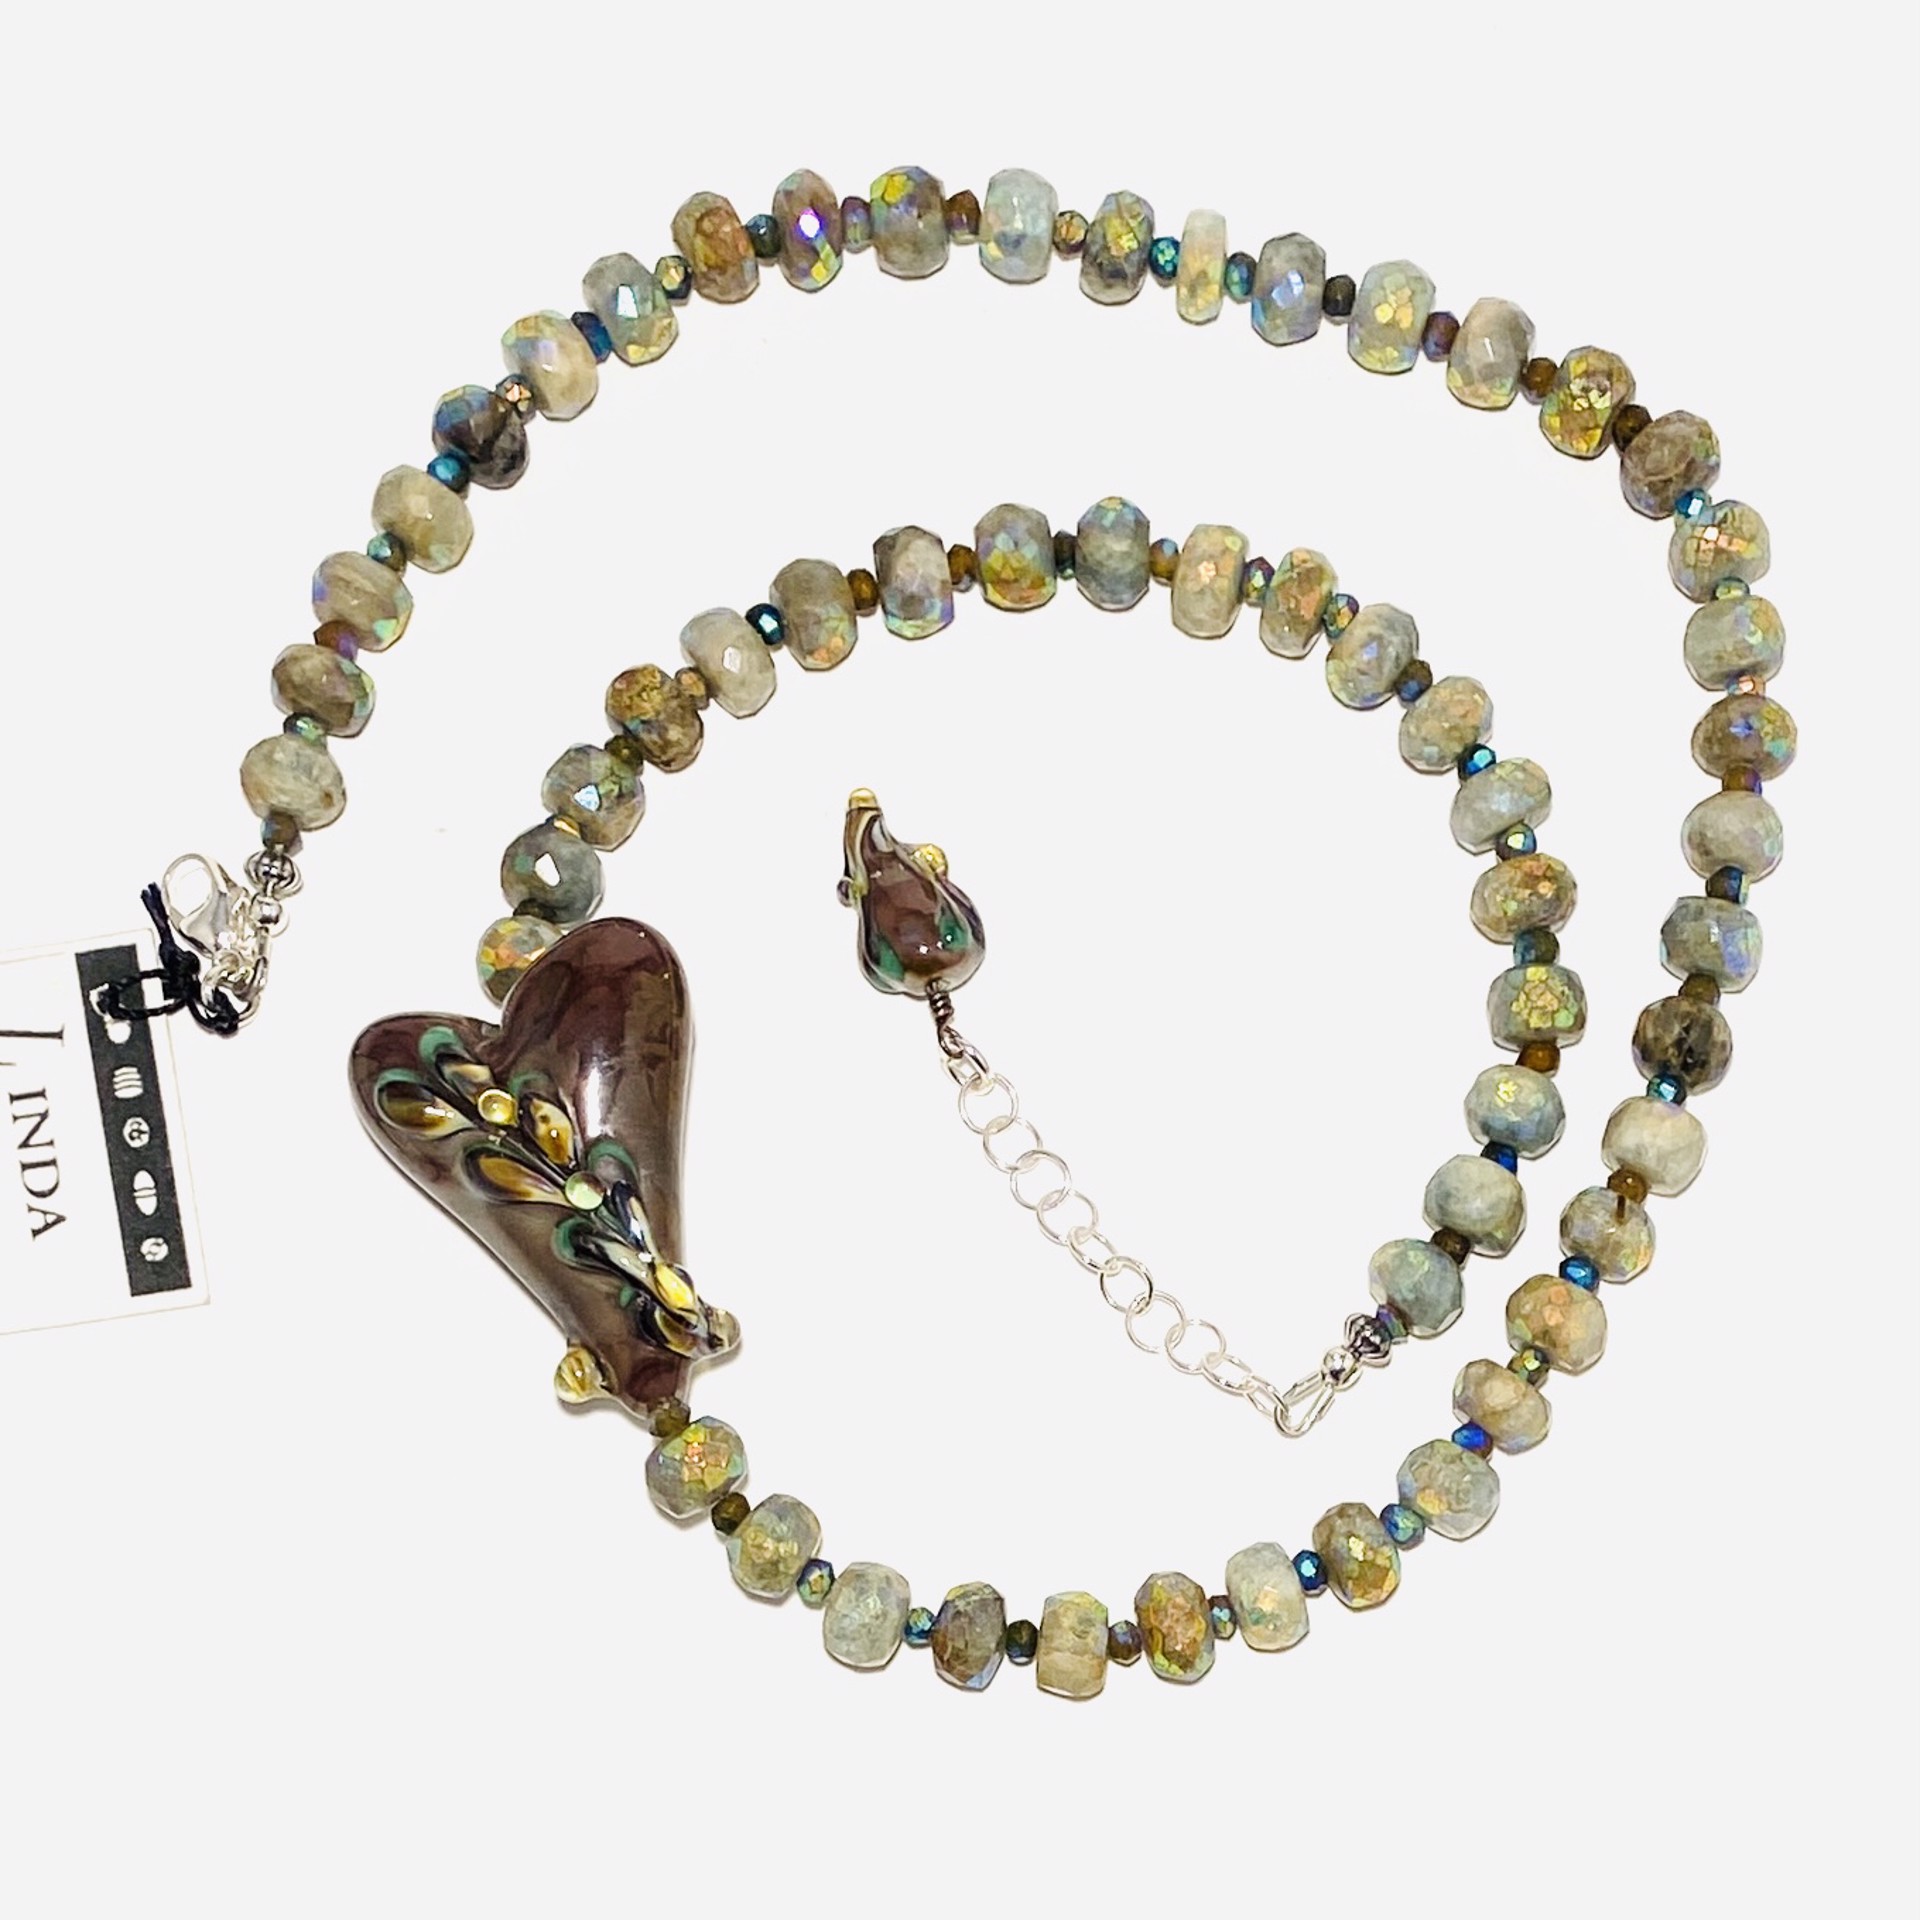 LS23-10A Offset Plum  Heart with Feather Semi Precious Bead Necklace by Linda Sacra